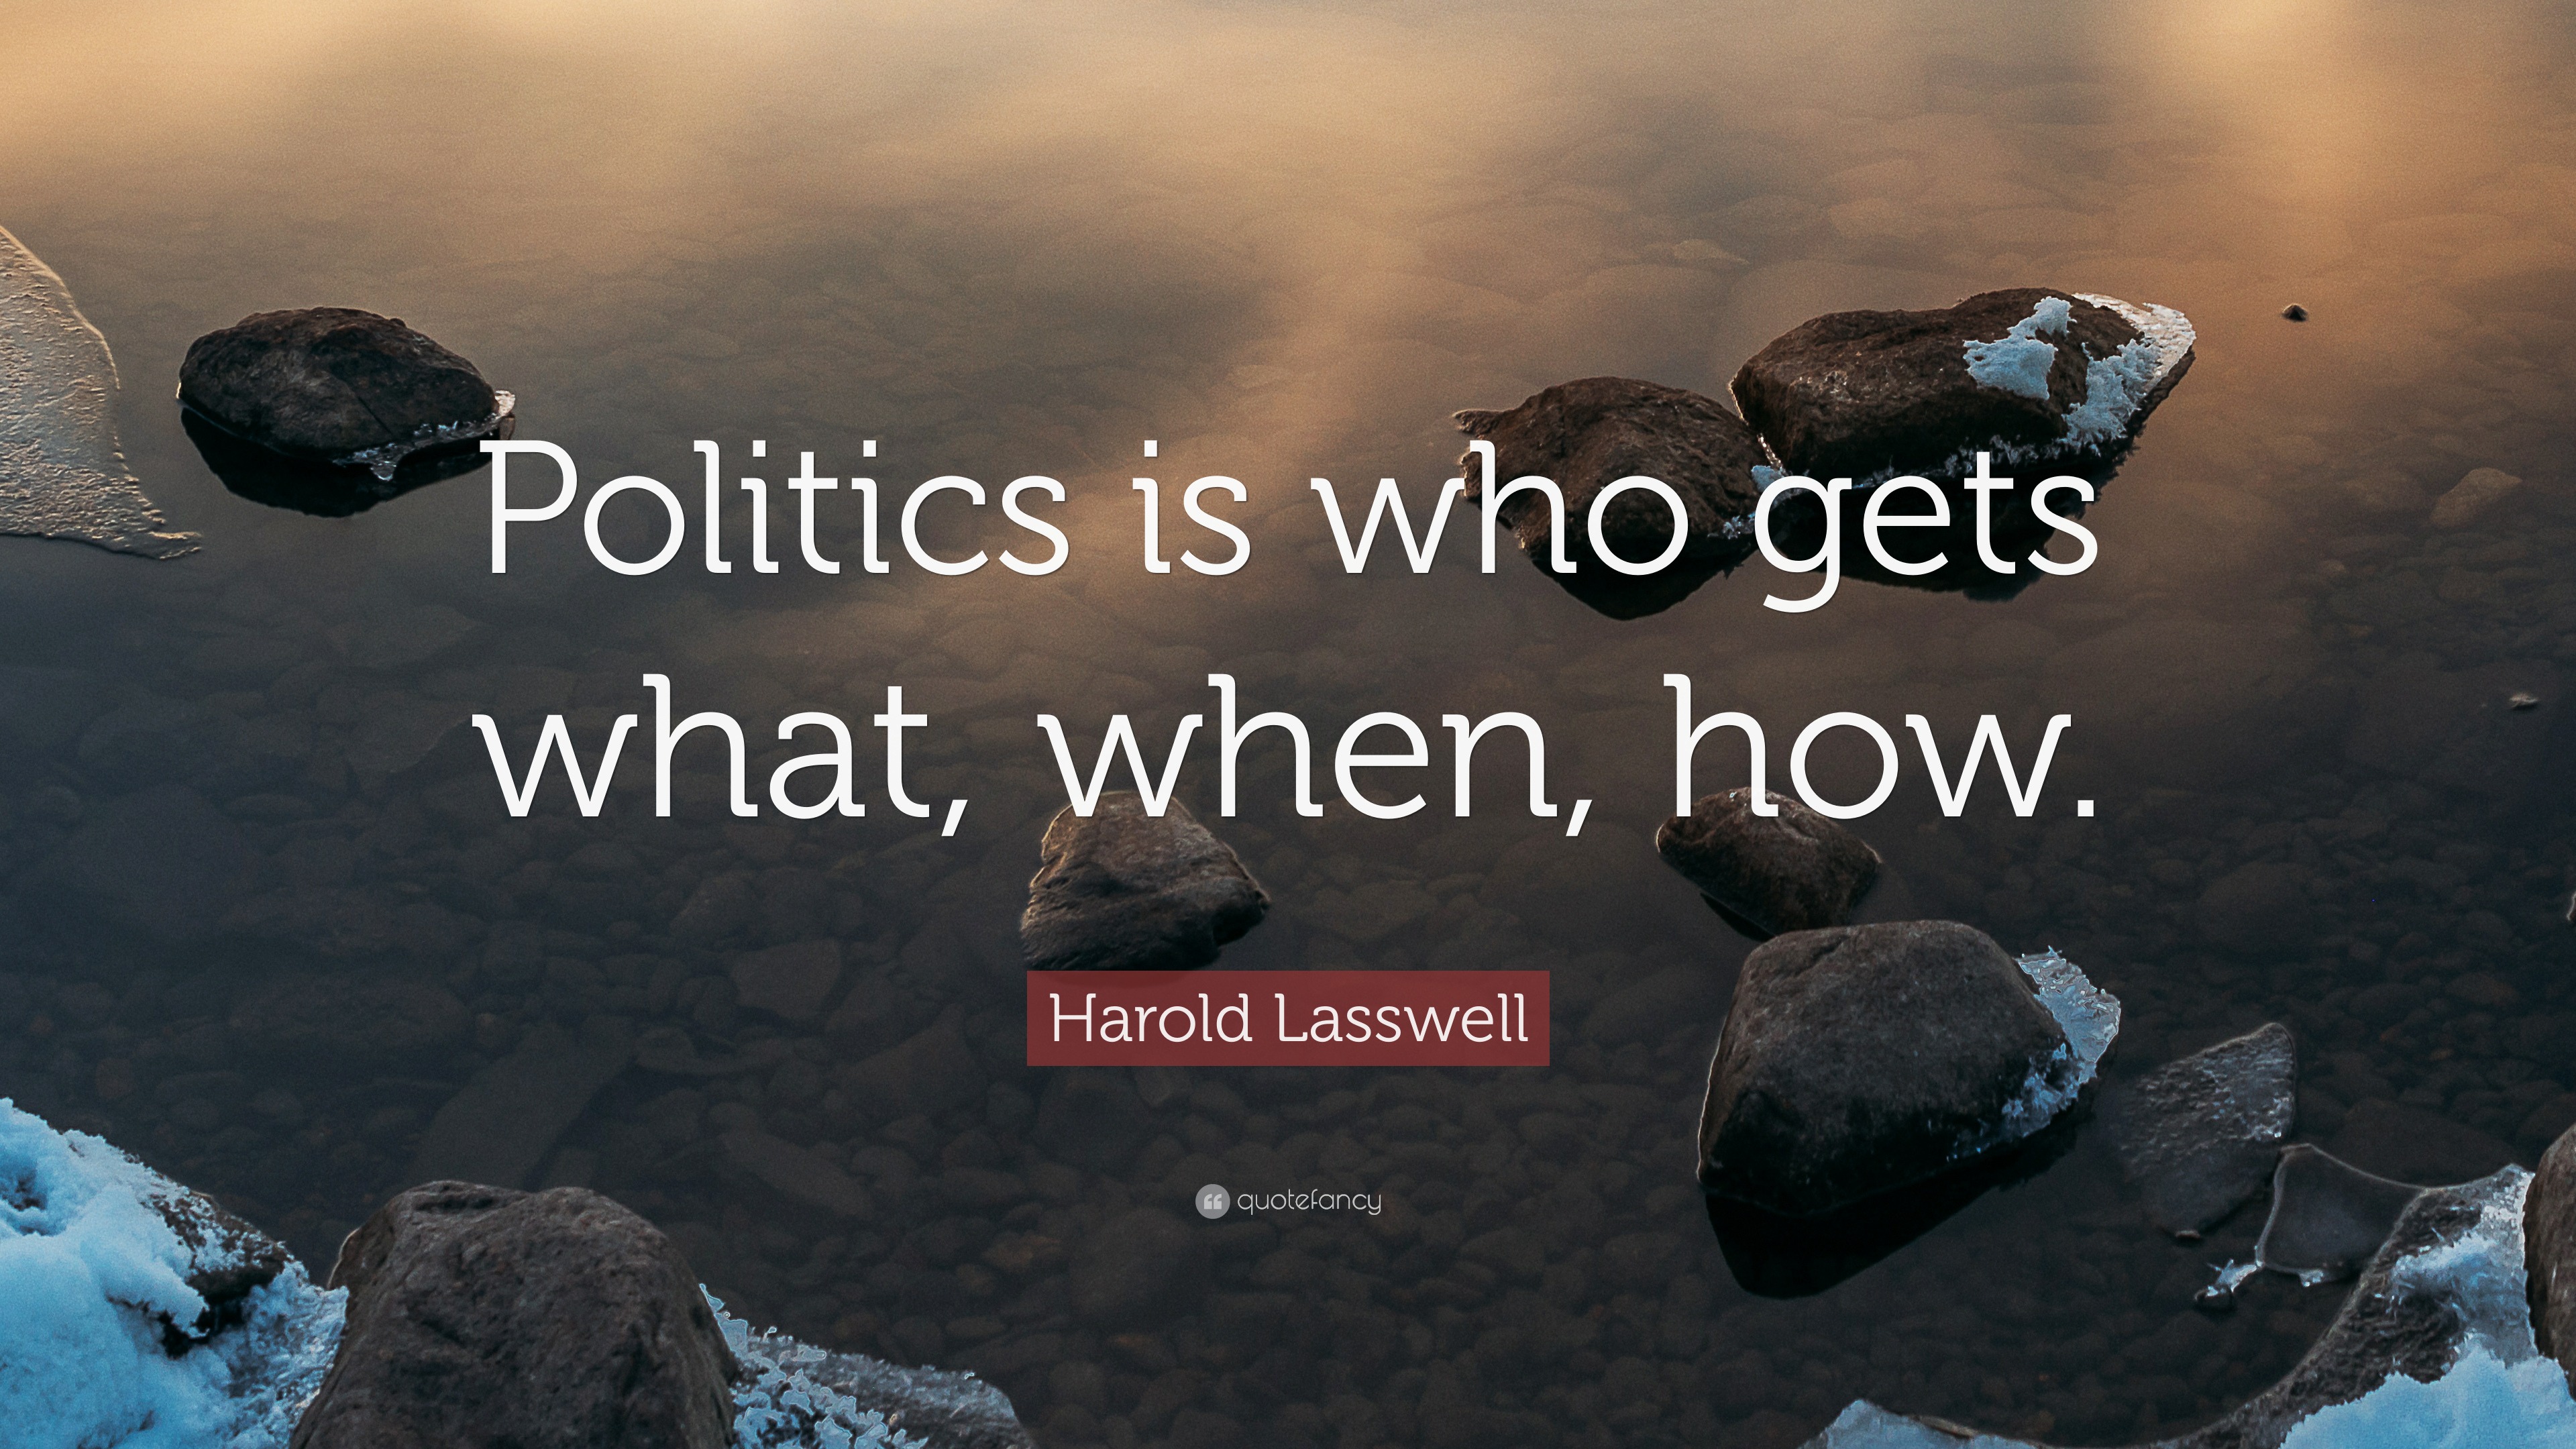 Harold Lasswell Quote: “Politics is who gets what, when, how.”